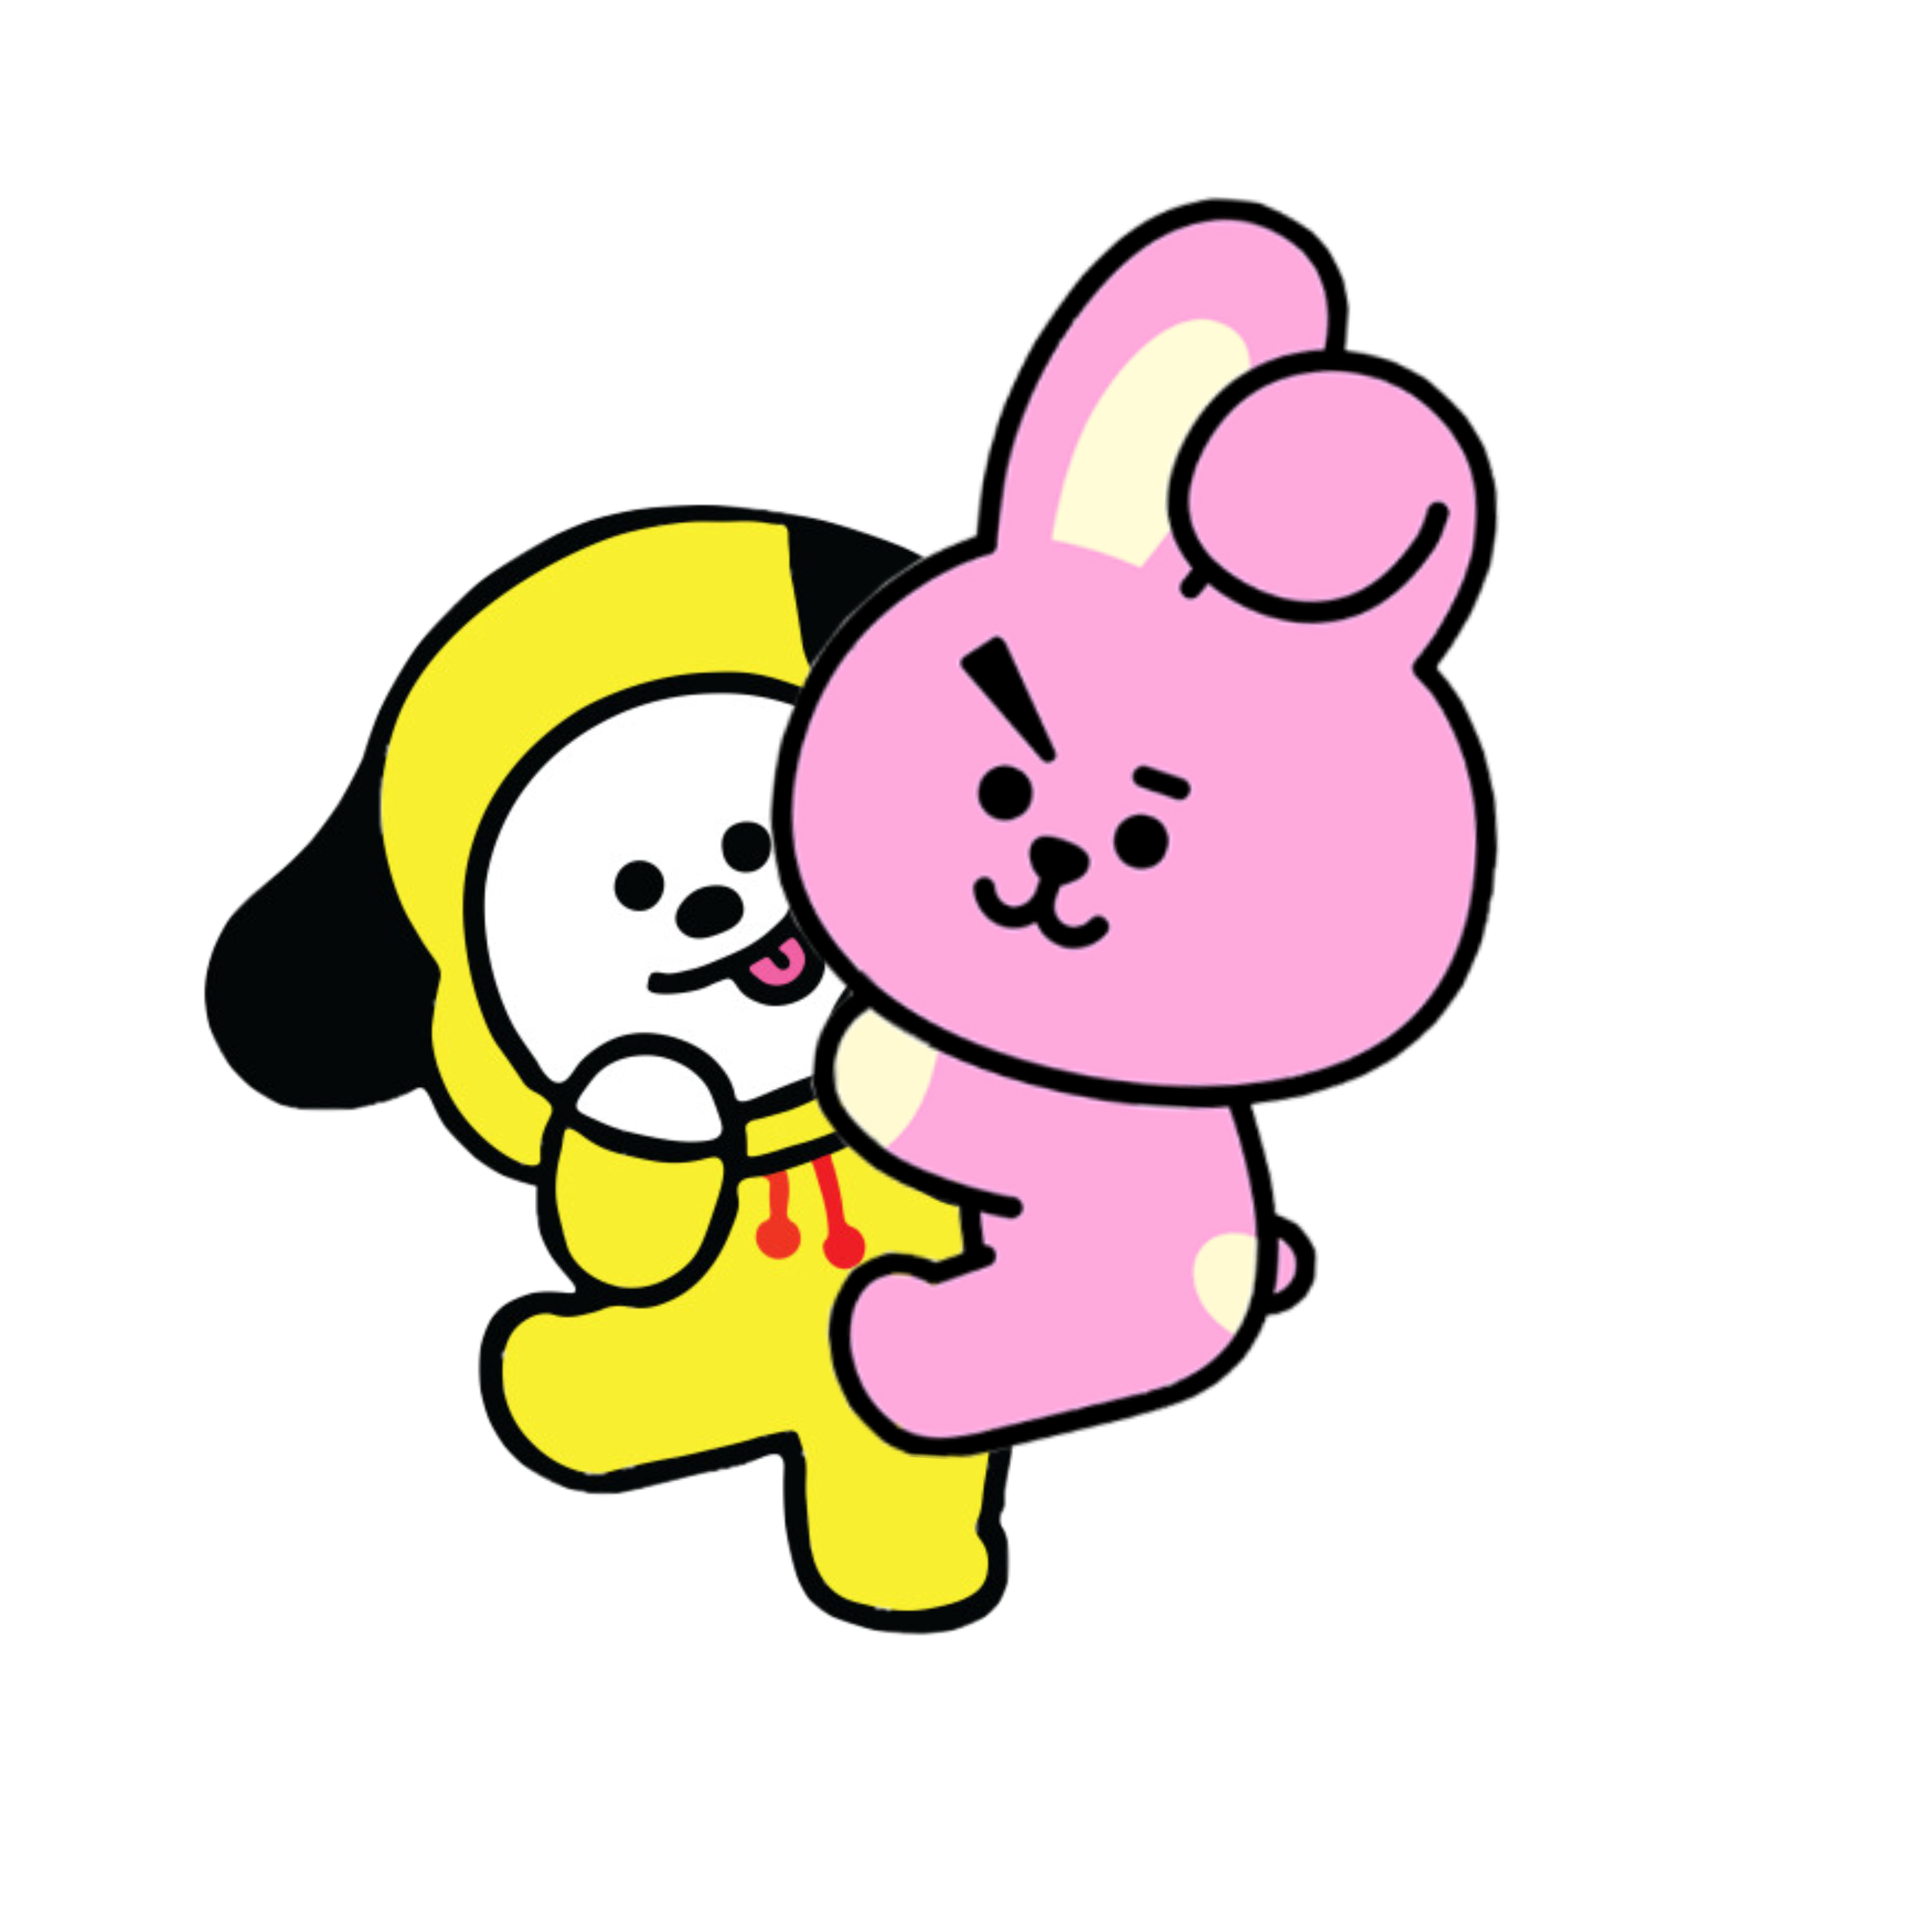 cooky chimmy  bt21  bts kpop characters  love cute bunny 